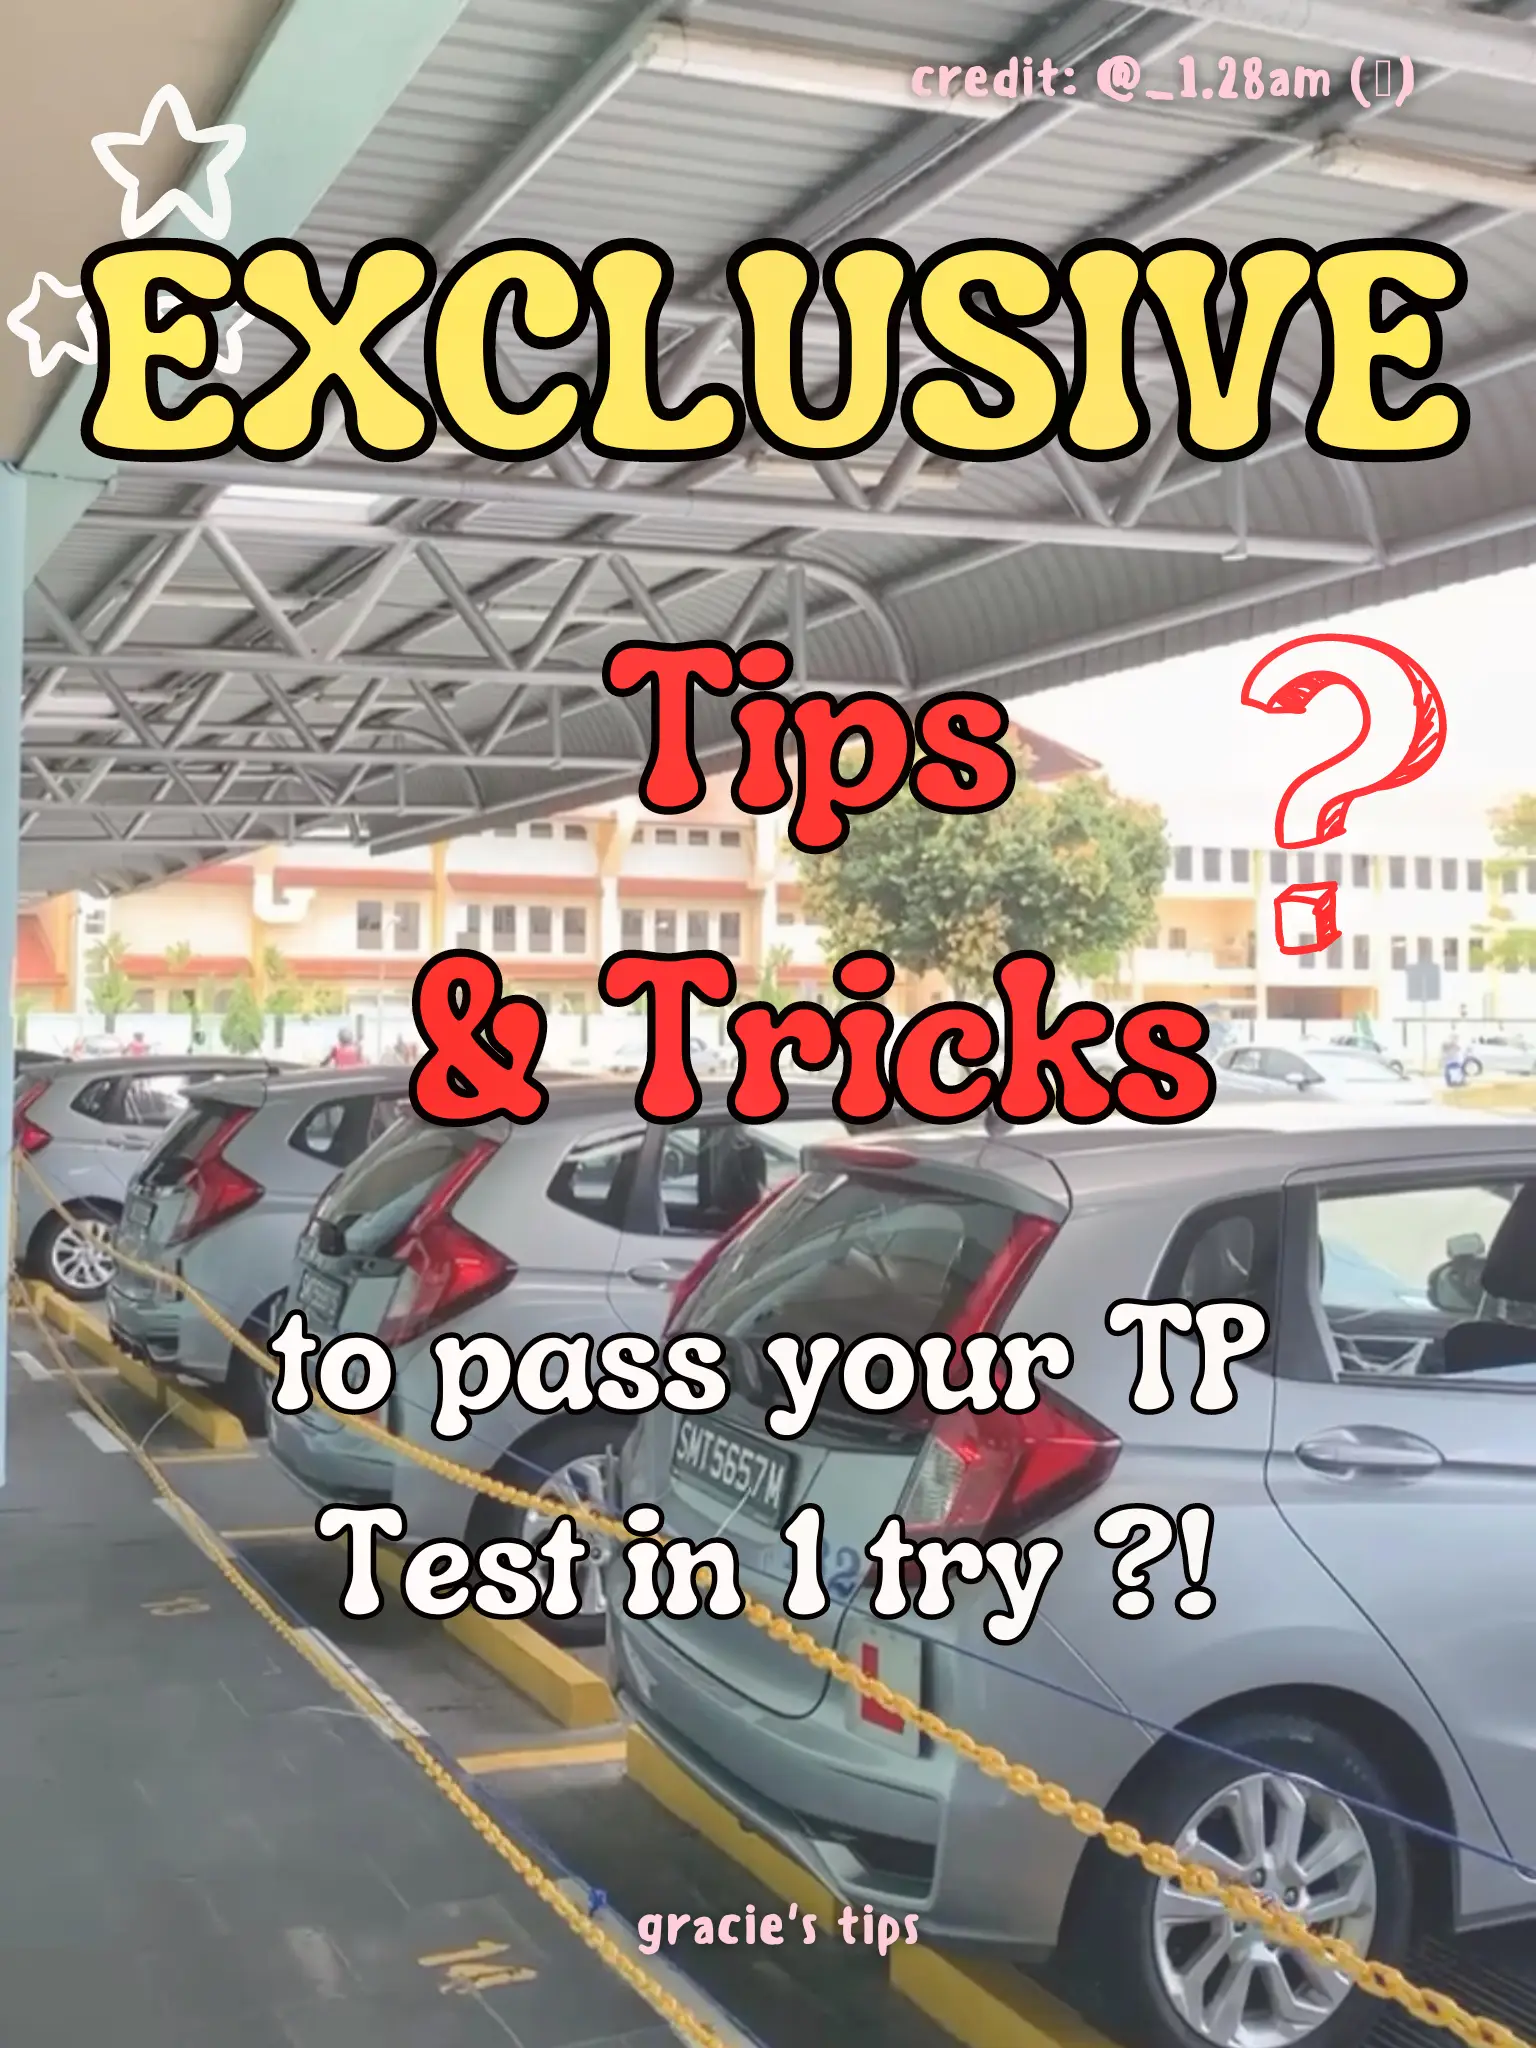 My Go-To Tips to pass TP test in 1 try! FREE NOTES's images(0)